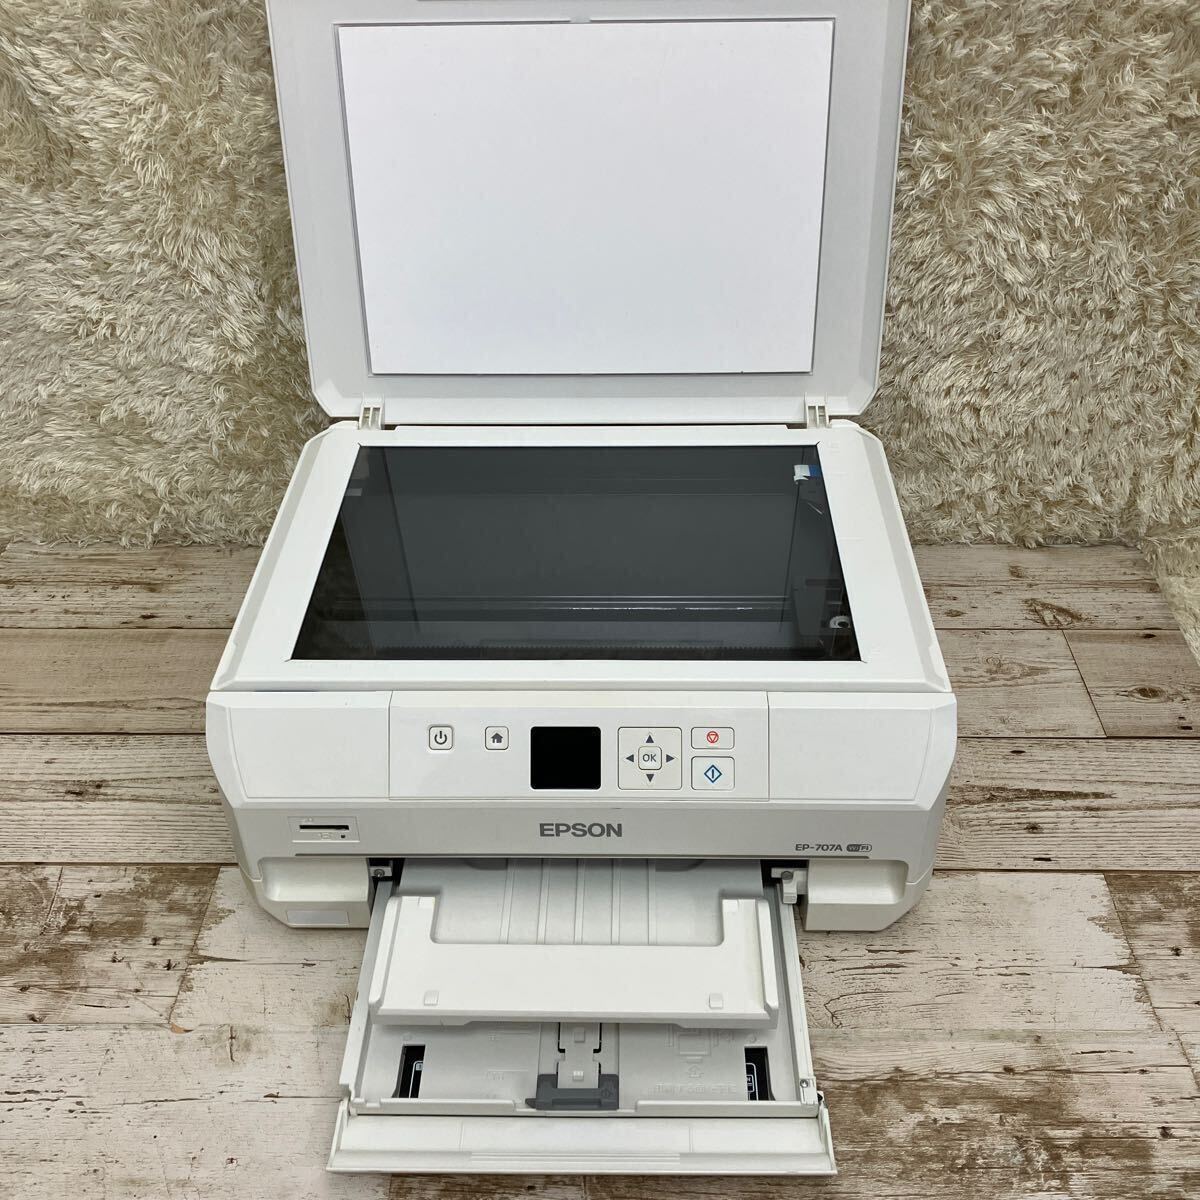 EPSON EP-707A プリンター 通電 ジャンク_画像3